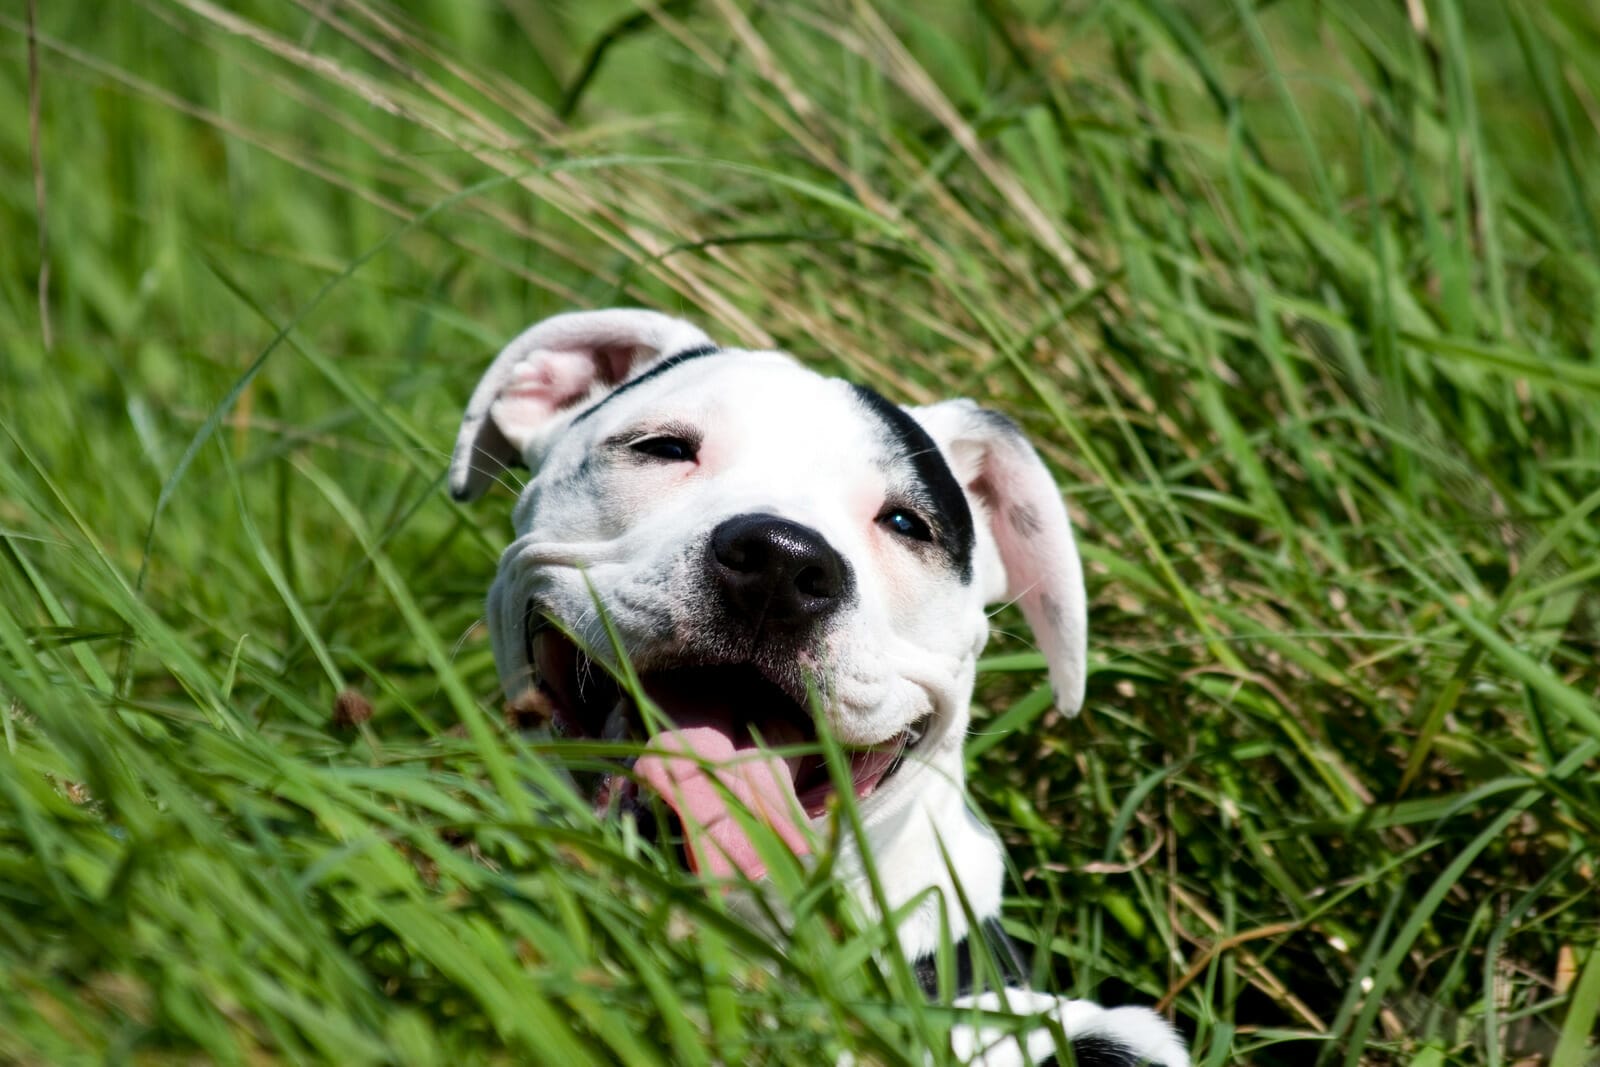 American Staffordshire Terrier in grass